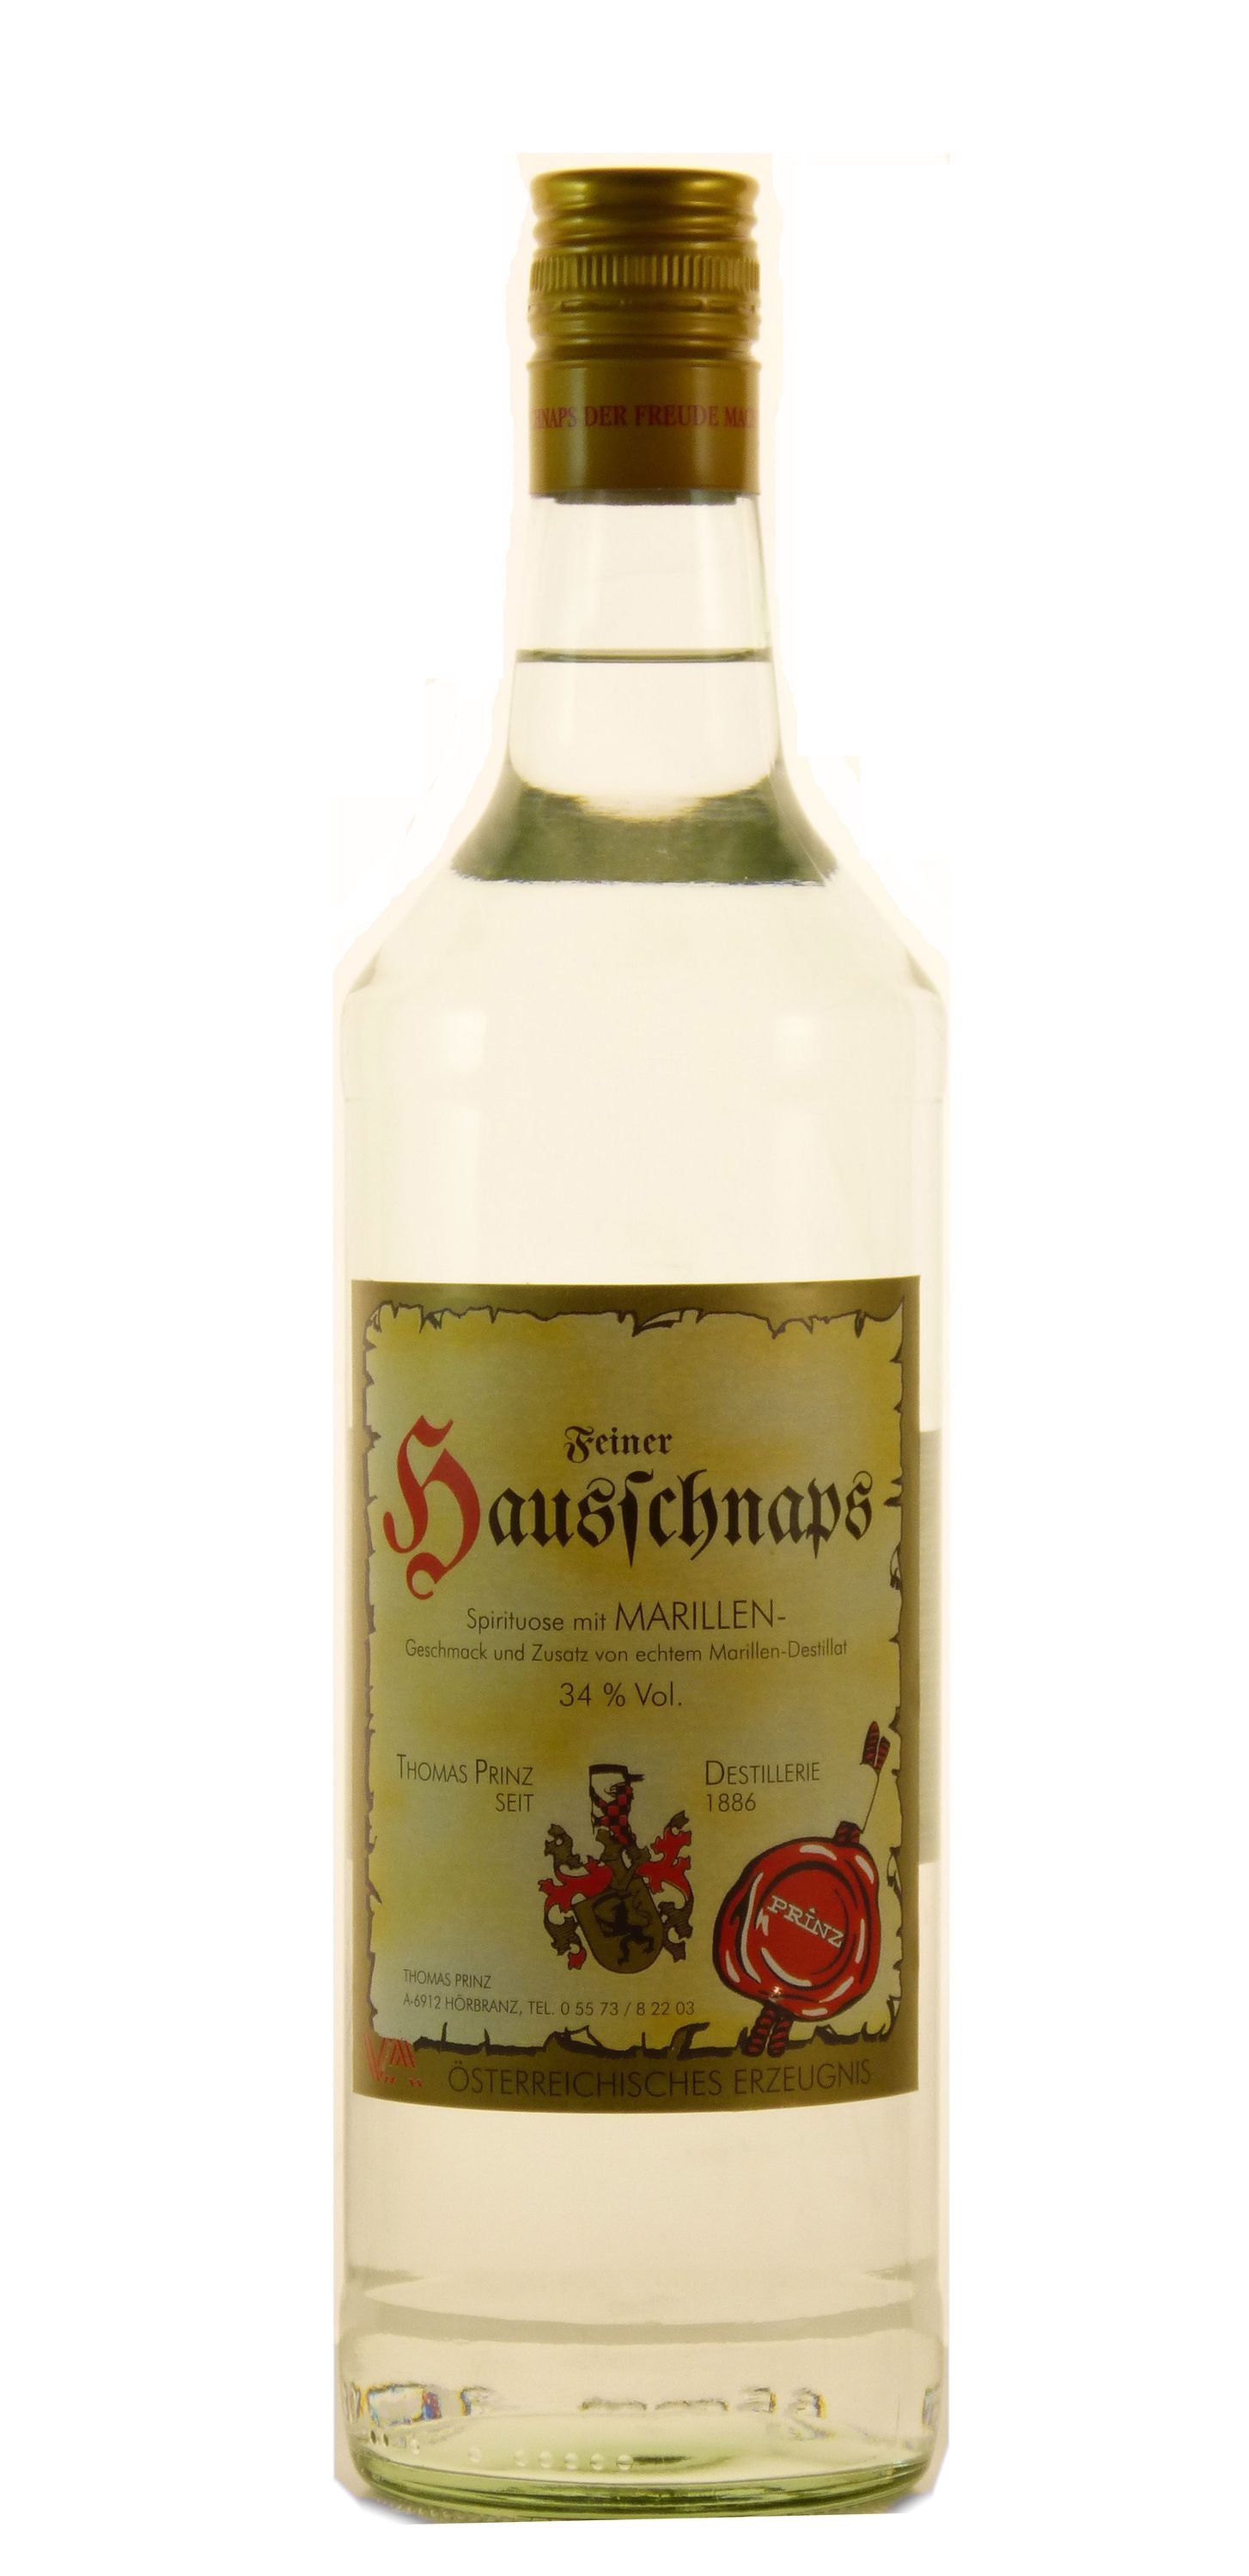 Prinz house schnapps with apricot flavor 1.0l, alc. 34% by volume